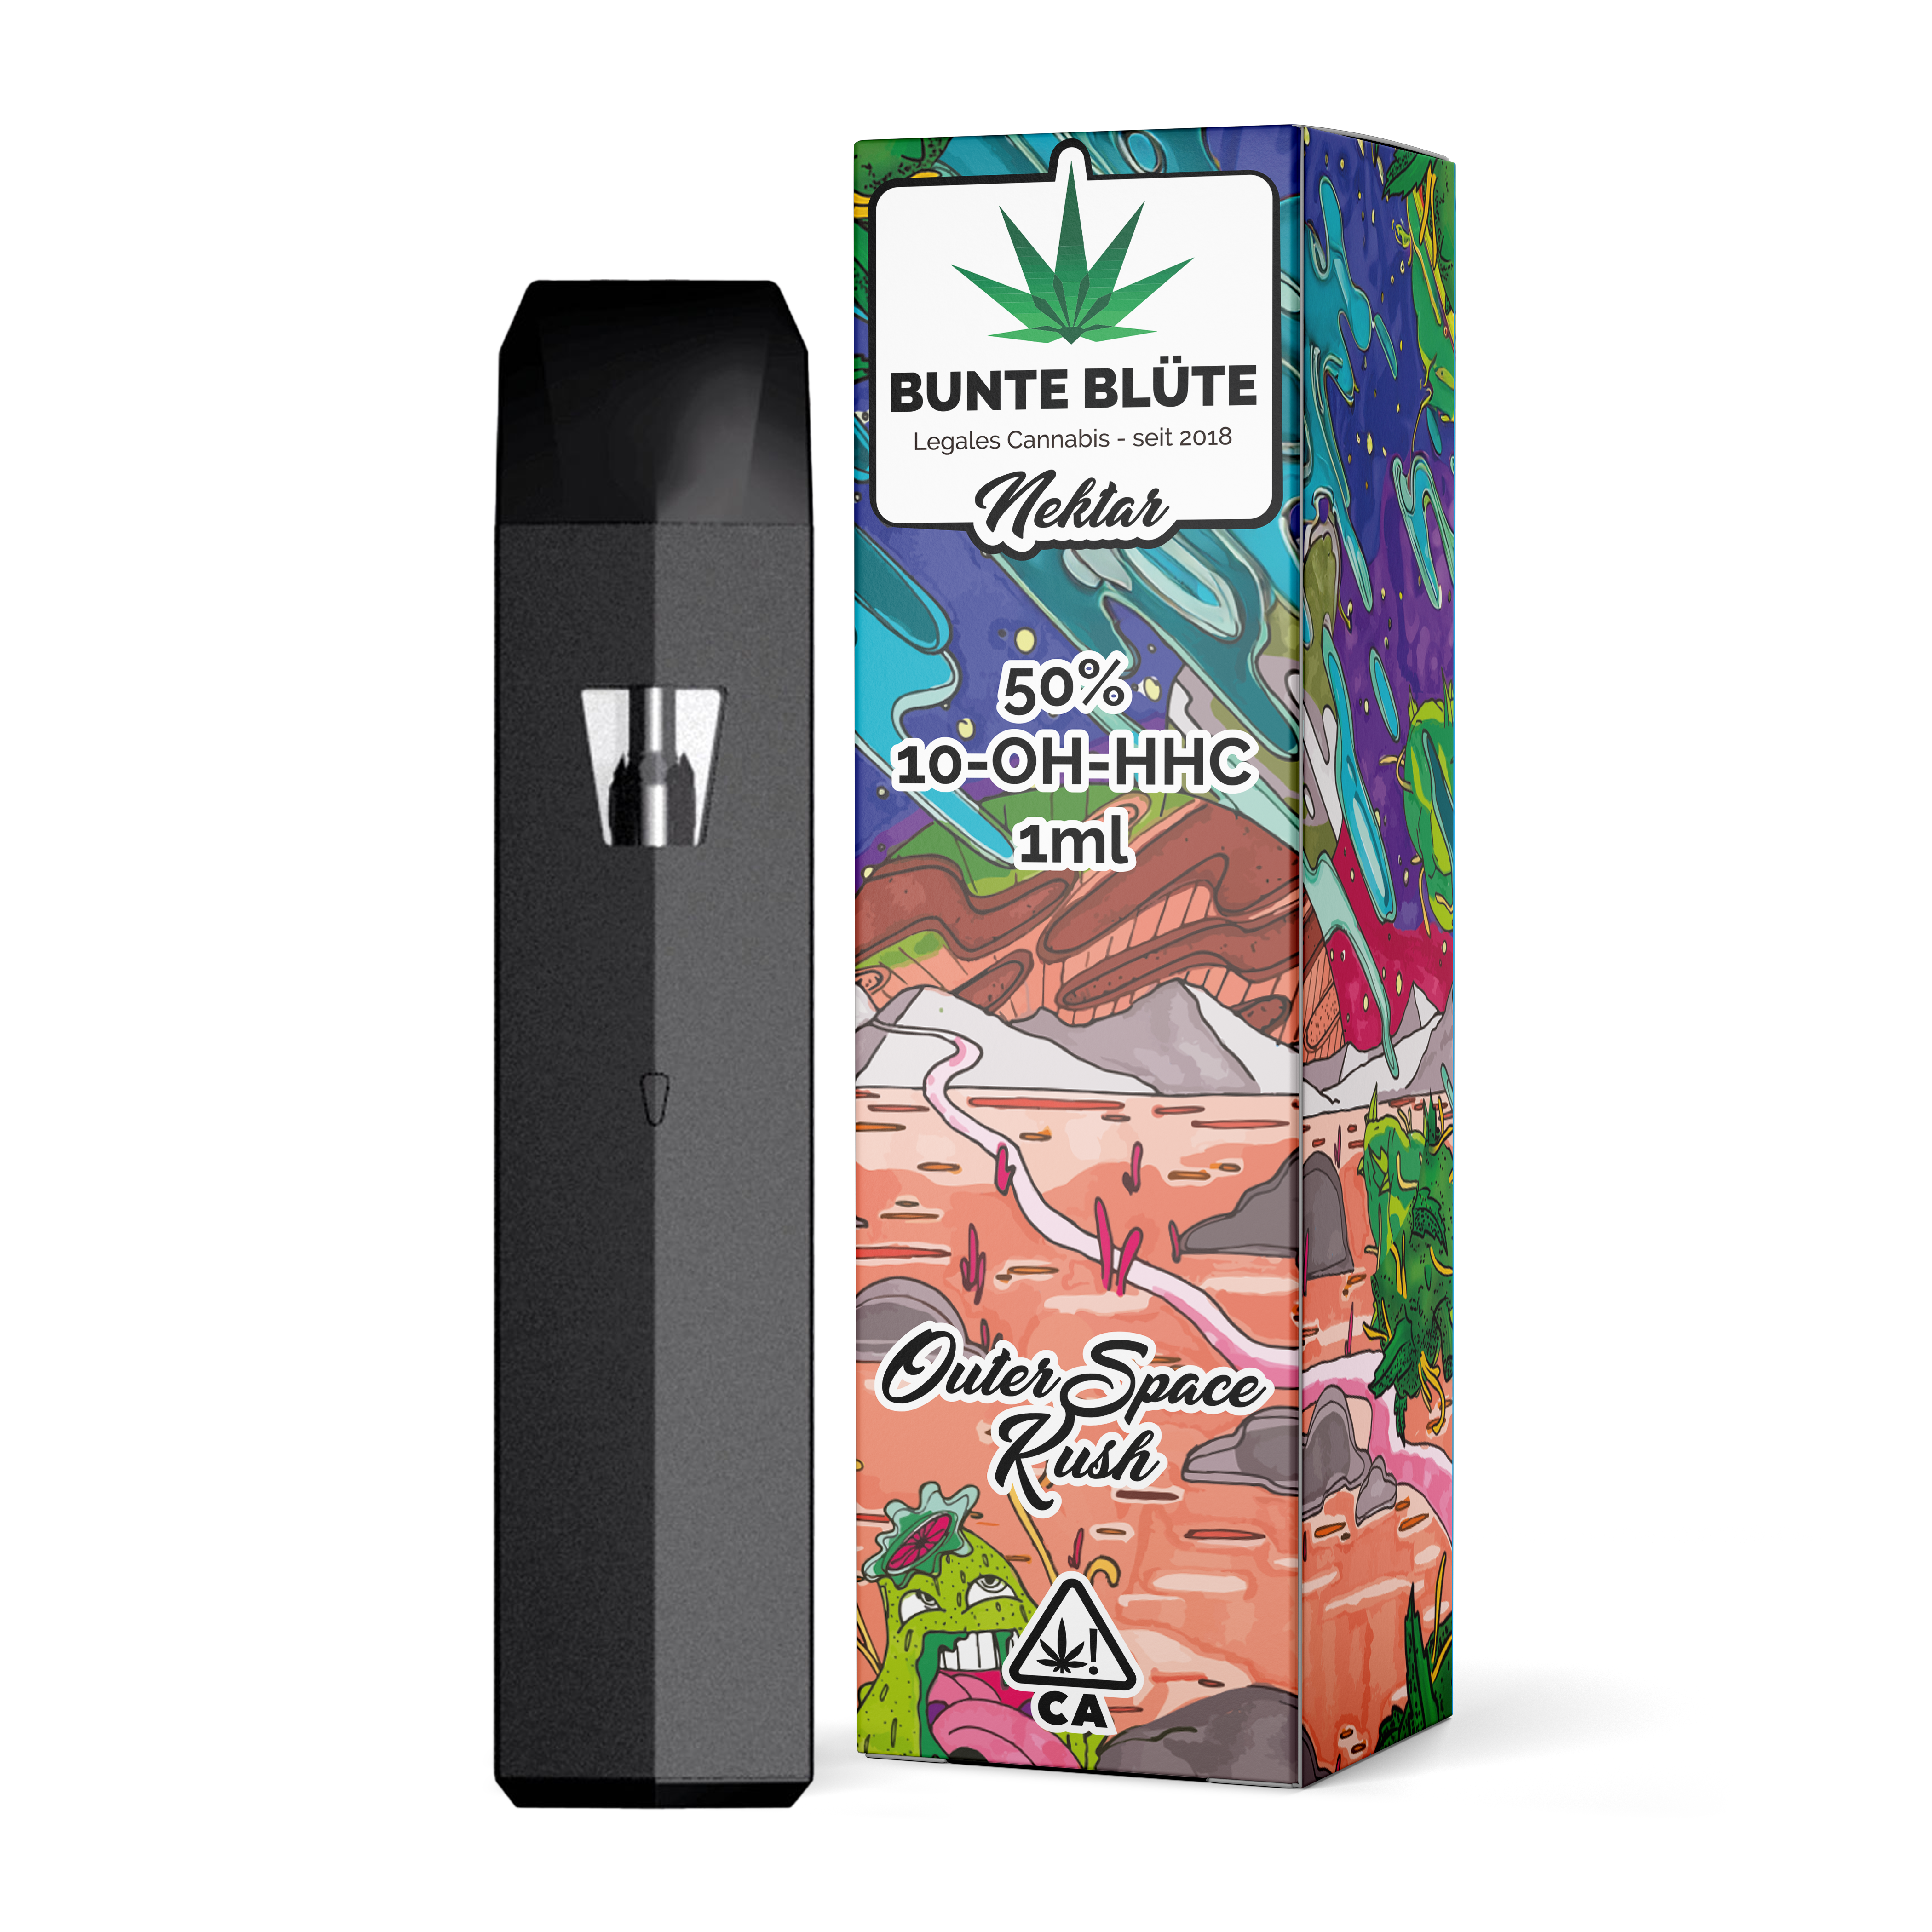 Bunte Blüte 10-OH-HHC Vape - Outer Space Kush 2ml